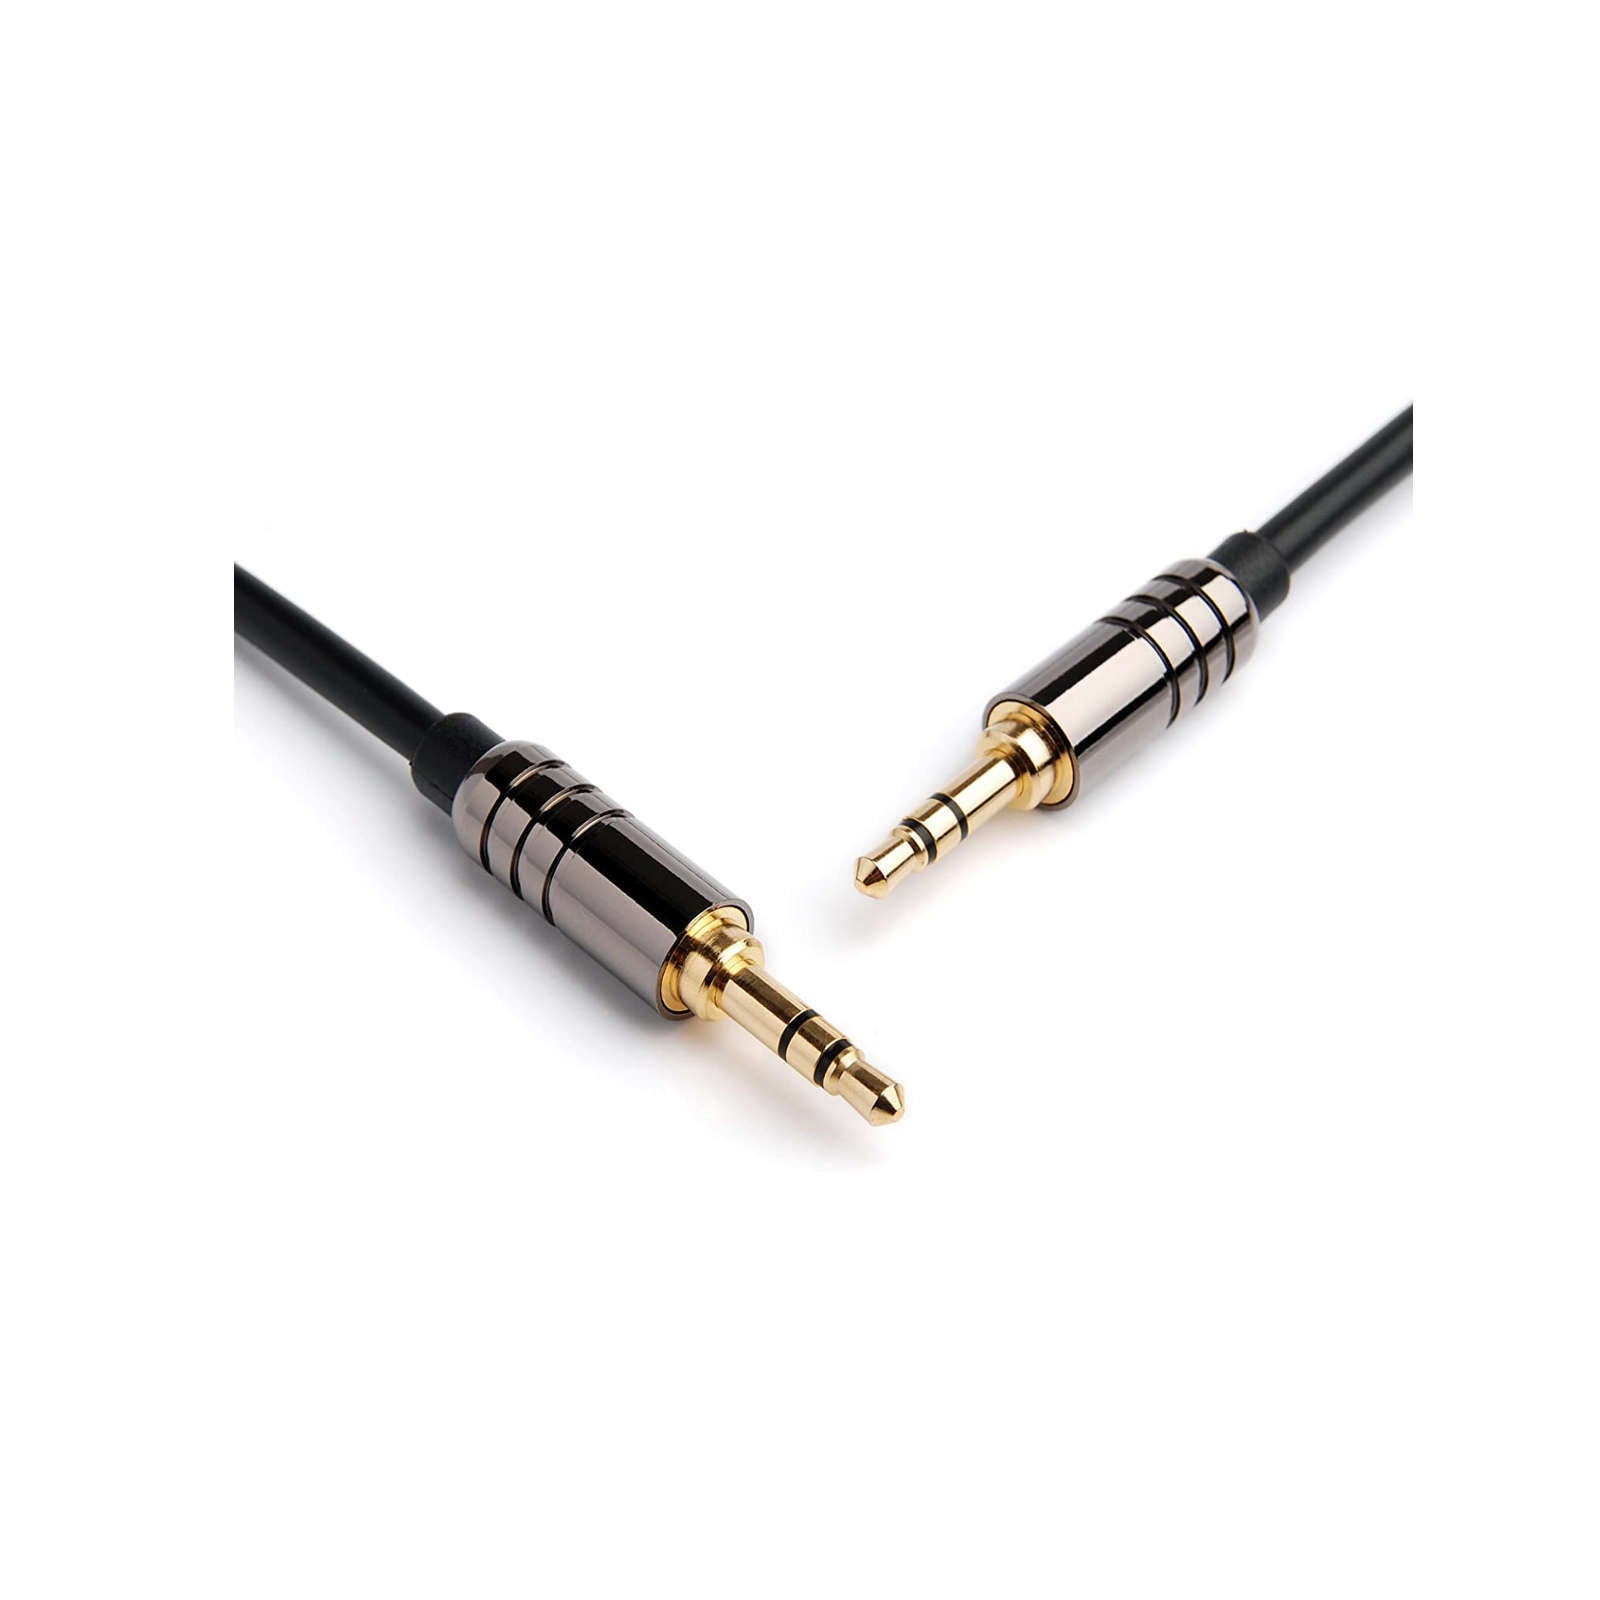 BlueRigger 3.5mm Male to Male Stereo Audio Cable (4 ft Black) - Ooberpad